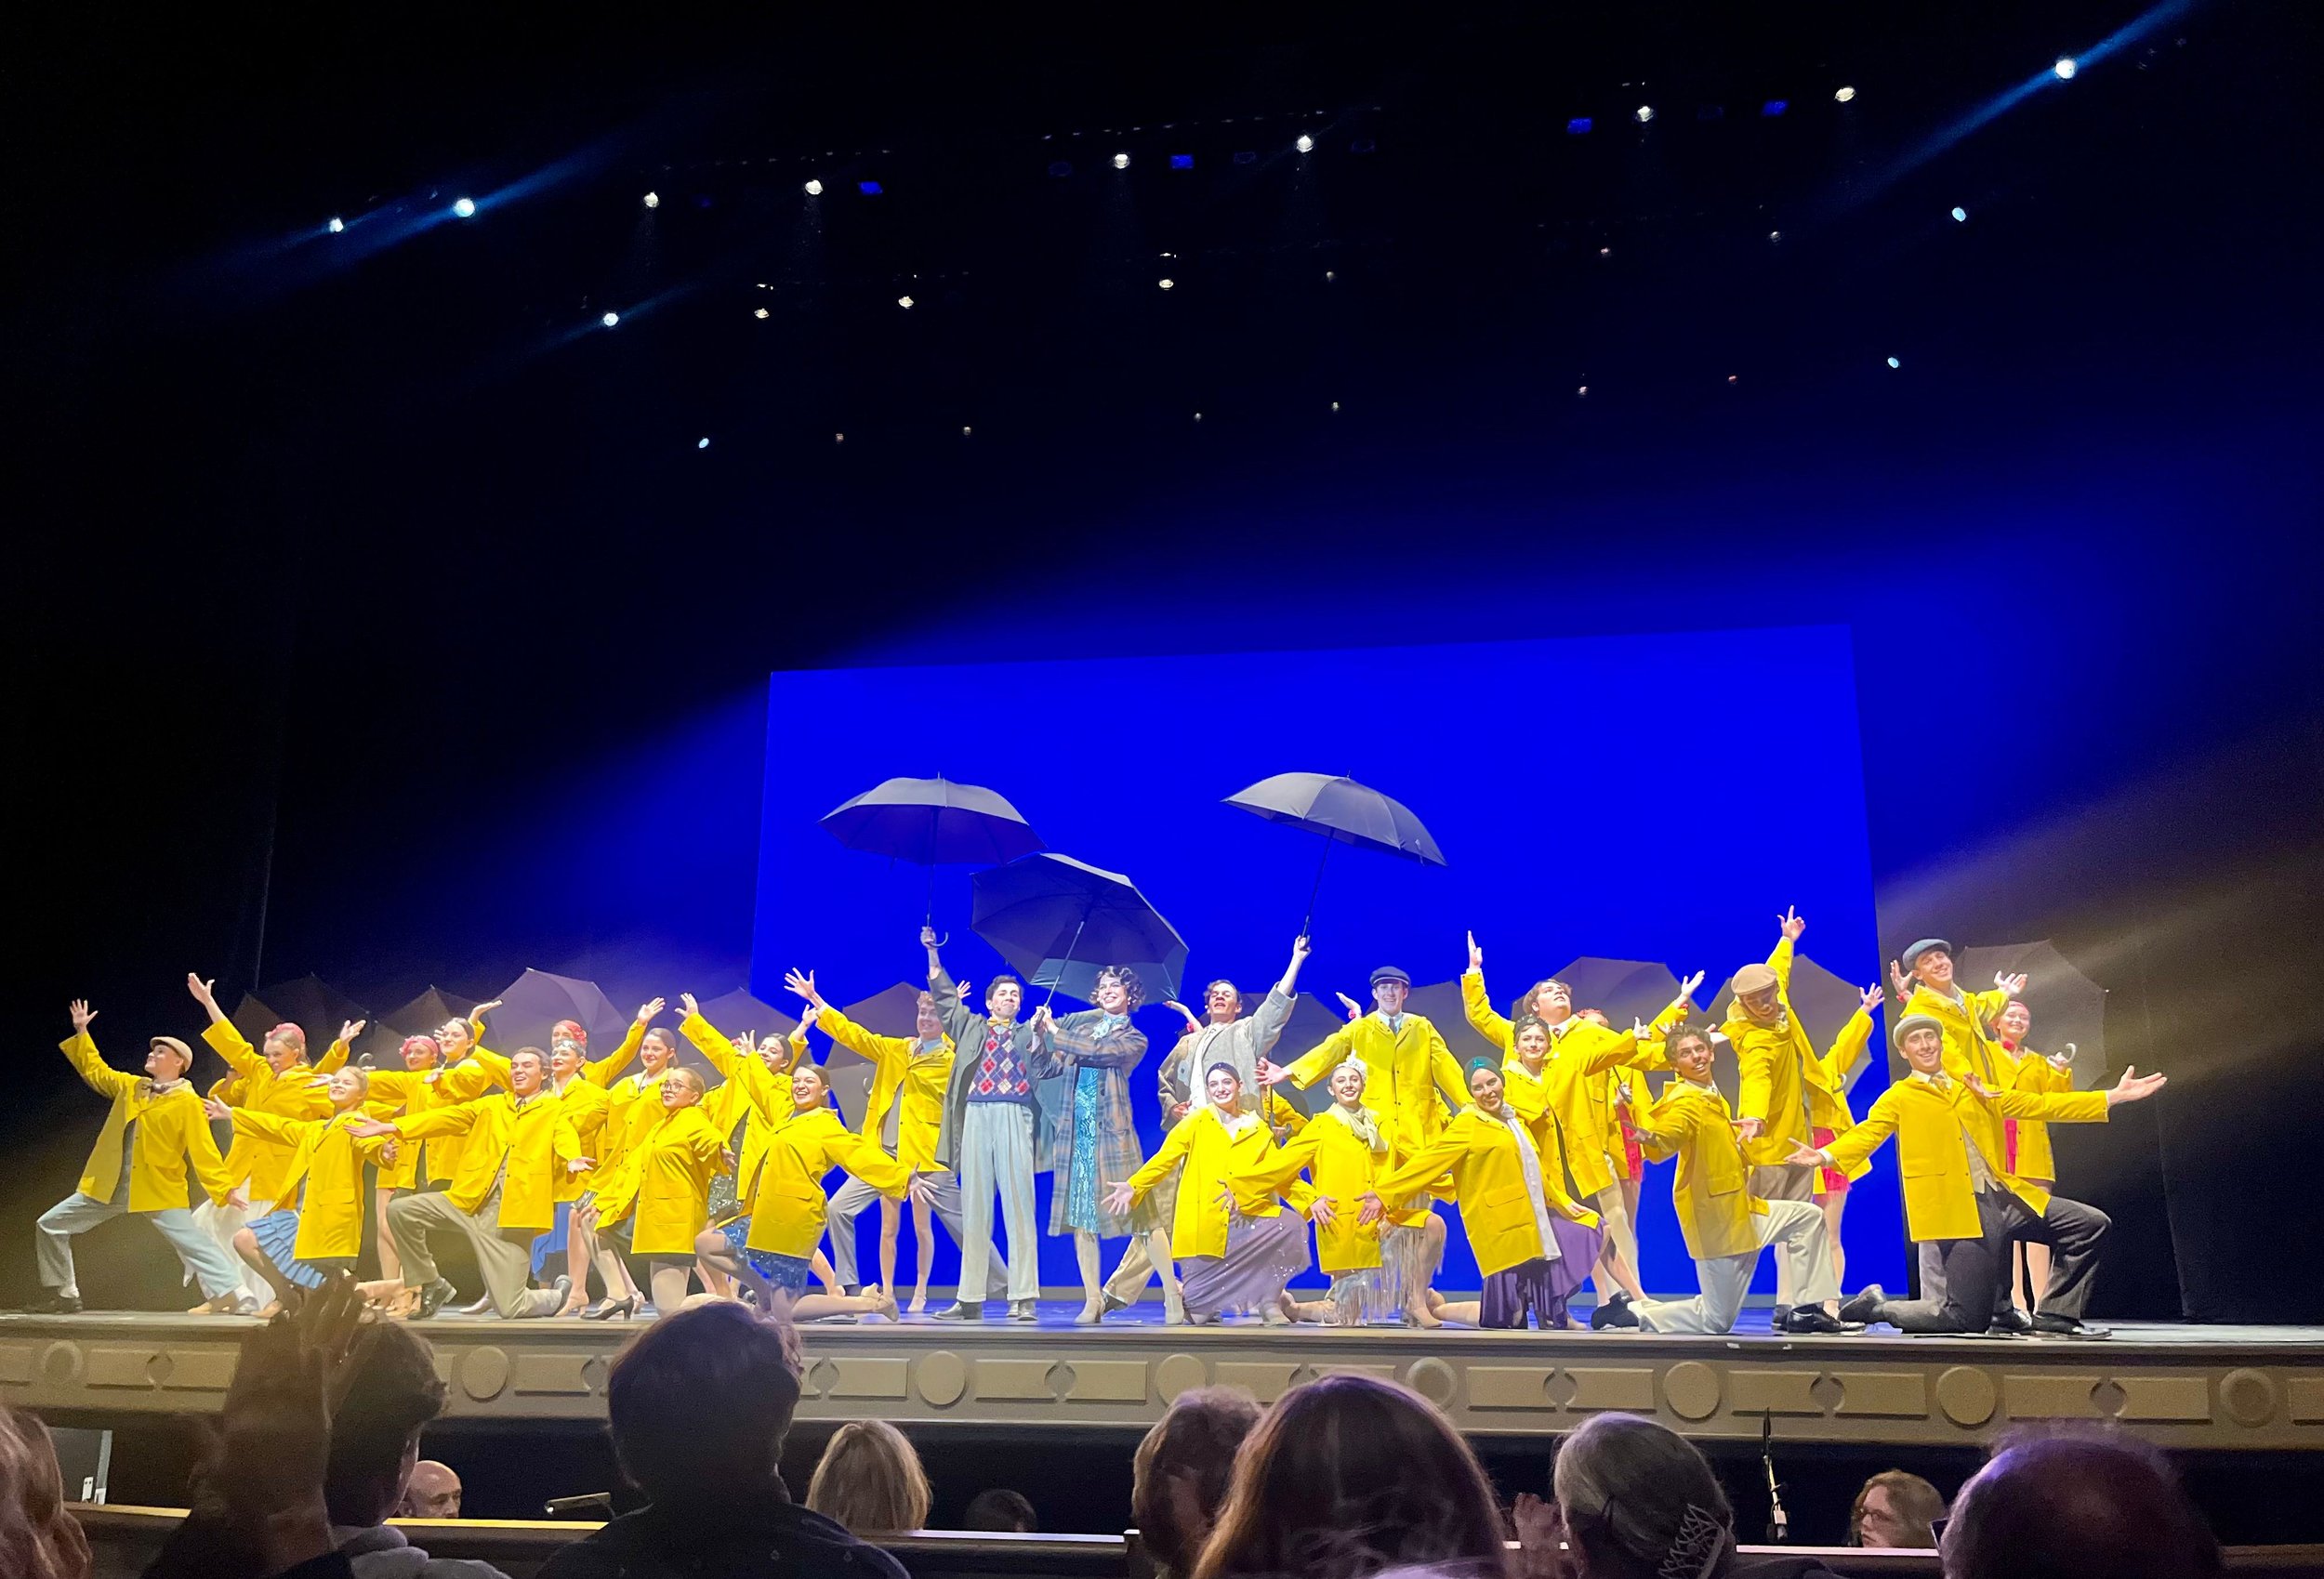 Epic night ☔️ Singing in the Rain preview at the Granada Theatre @granadasb! Show opens in 17 DAYS!
May 2-5 and May 9-11 with a matinee on the 5th at 2pm. TICKETS ARE NOW ON SALE. (link in story) #singingintherain #kathy #musicaltheatre #santabarbara